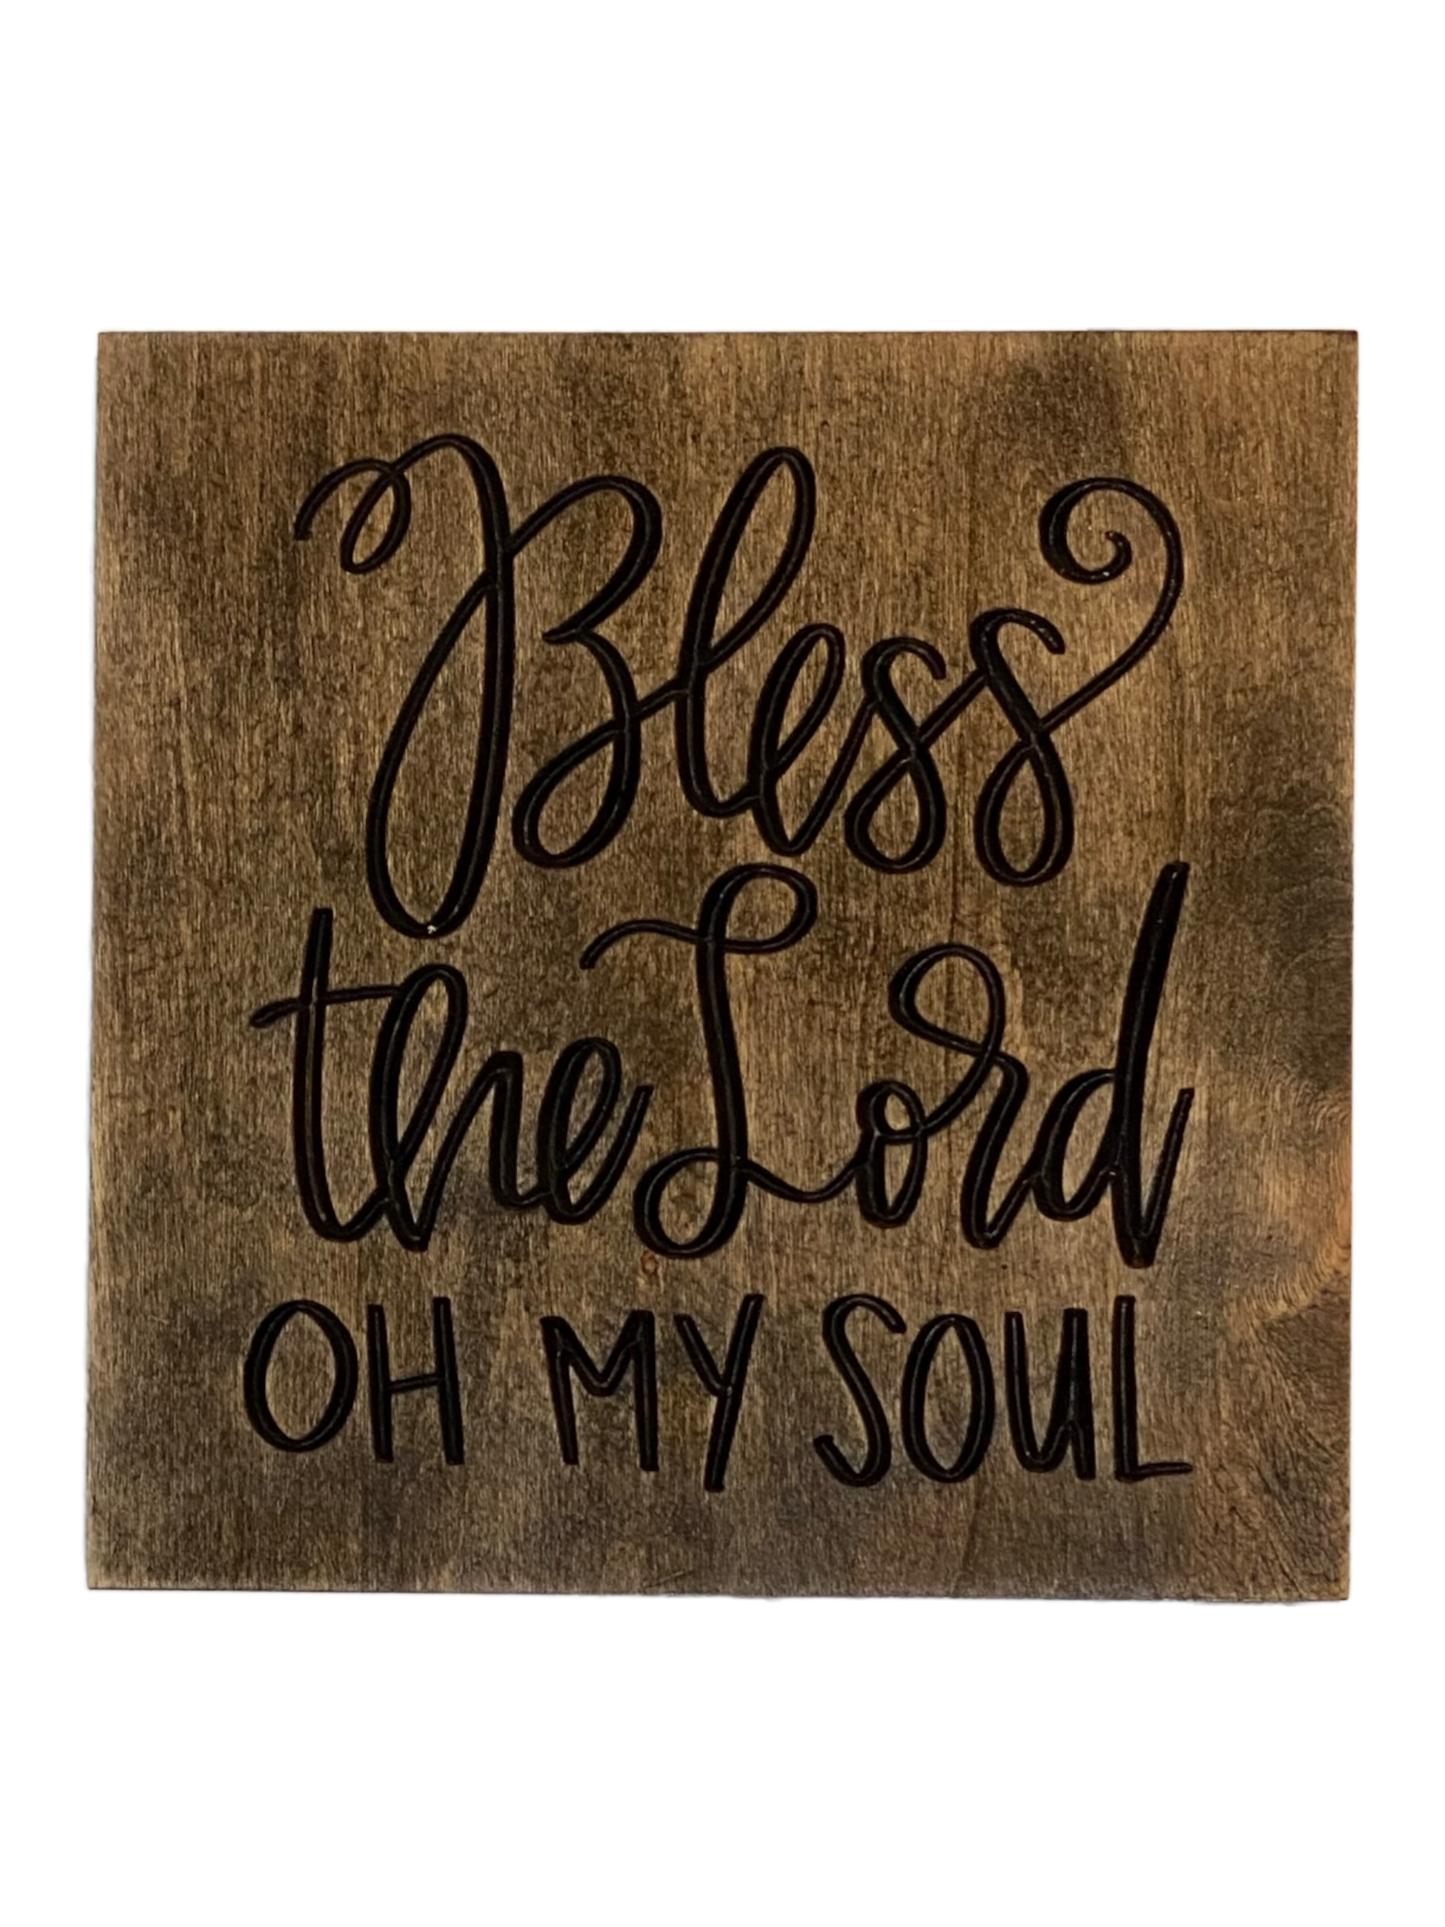 Bless The Lord Oh My Soul Wood Carved Wall Art